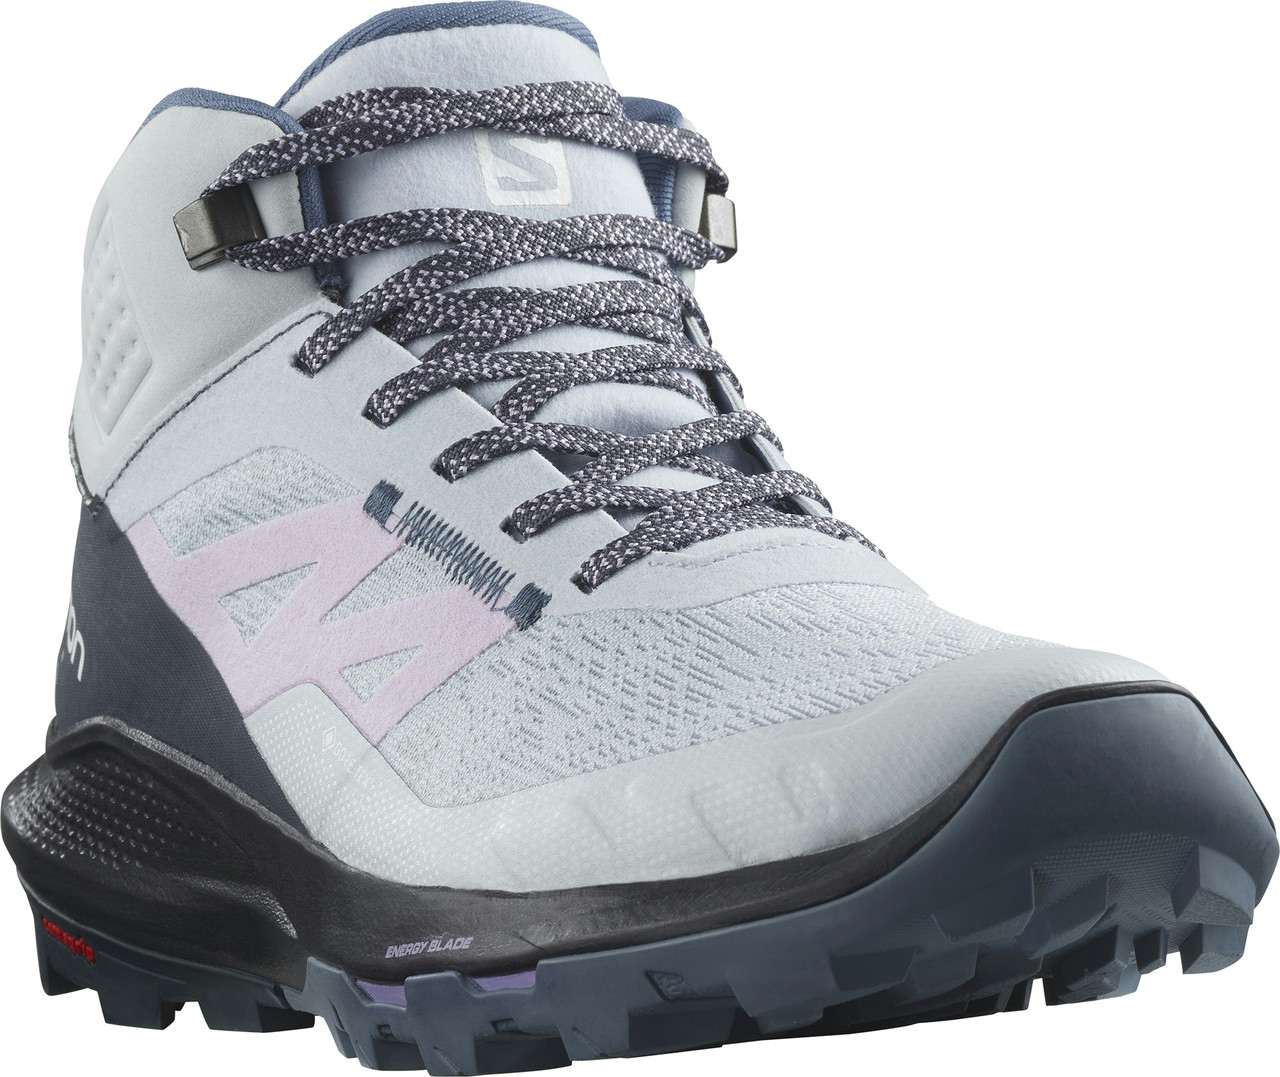 OUTpulse Mid Gore-Tex Light Trail Shoes Artic Ice/India Ink/Orchi